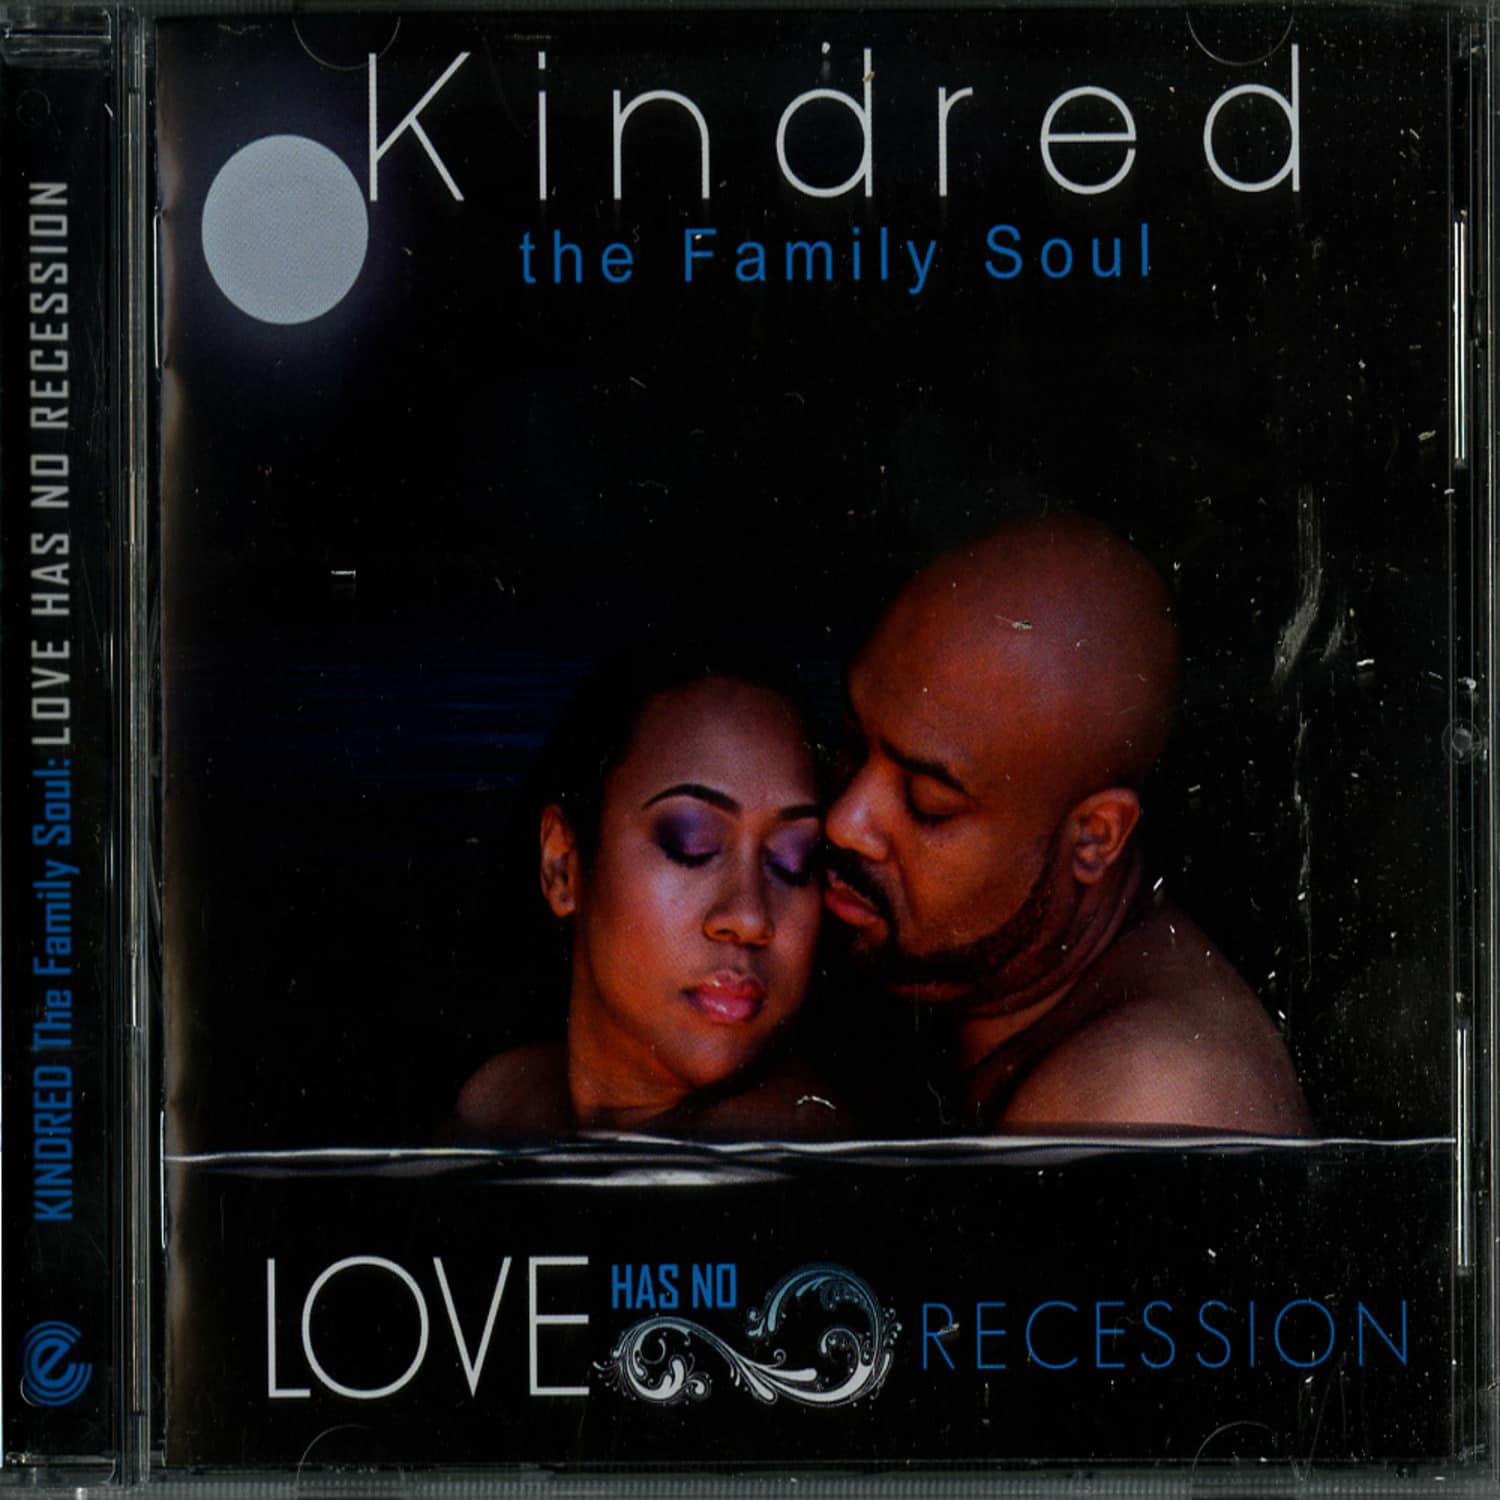 Kindred The Family Soul - LOVE HAS NO RECESSION 